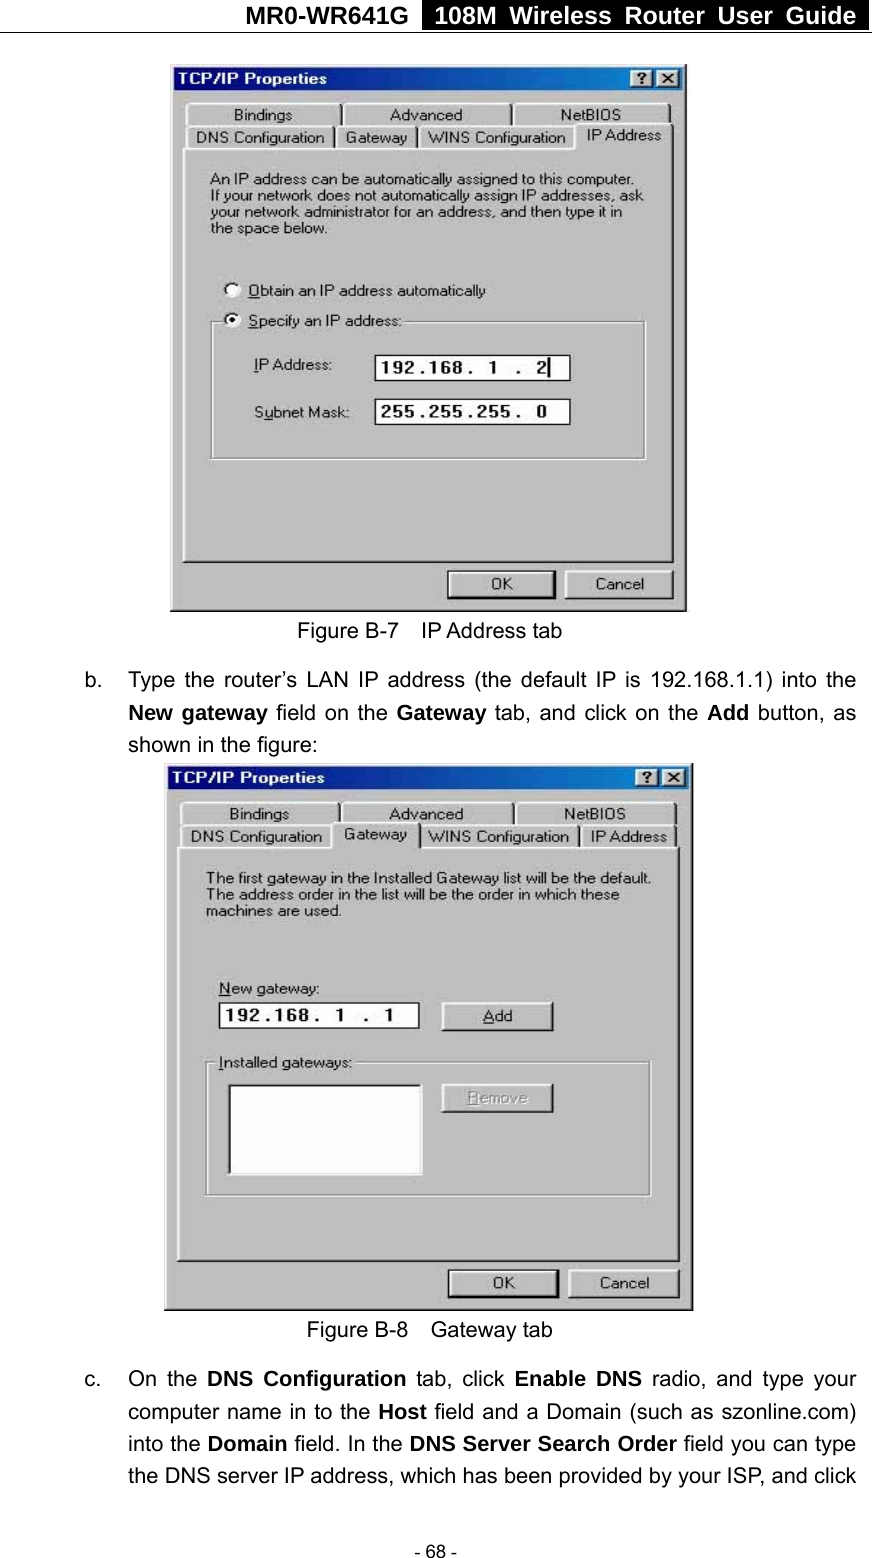 MR0-WR641G   108M Wireless Router User Guide   Figure B-7  IP Address tab b.  Type the router’s LAN IP address (the default IP is 192.168.1.1) into the New gateway field on the Gateway tab, and click on the Add button, as shown in the figure:    Figure B-8  Gateway tab c. On the DNS Configuration tab, click Enable DNS radio, and type your computer name in to the Host field and a Domain (such as szonline.com) into the Domain field. In the DNS Server Search Order field you can type the DNS server IP address, which has been provided by your ISP, and click  - 68 - 